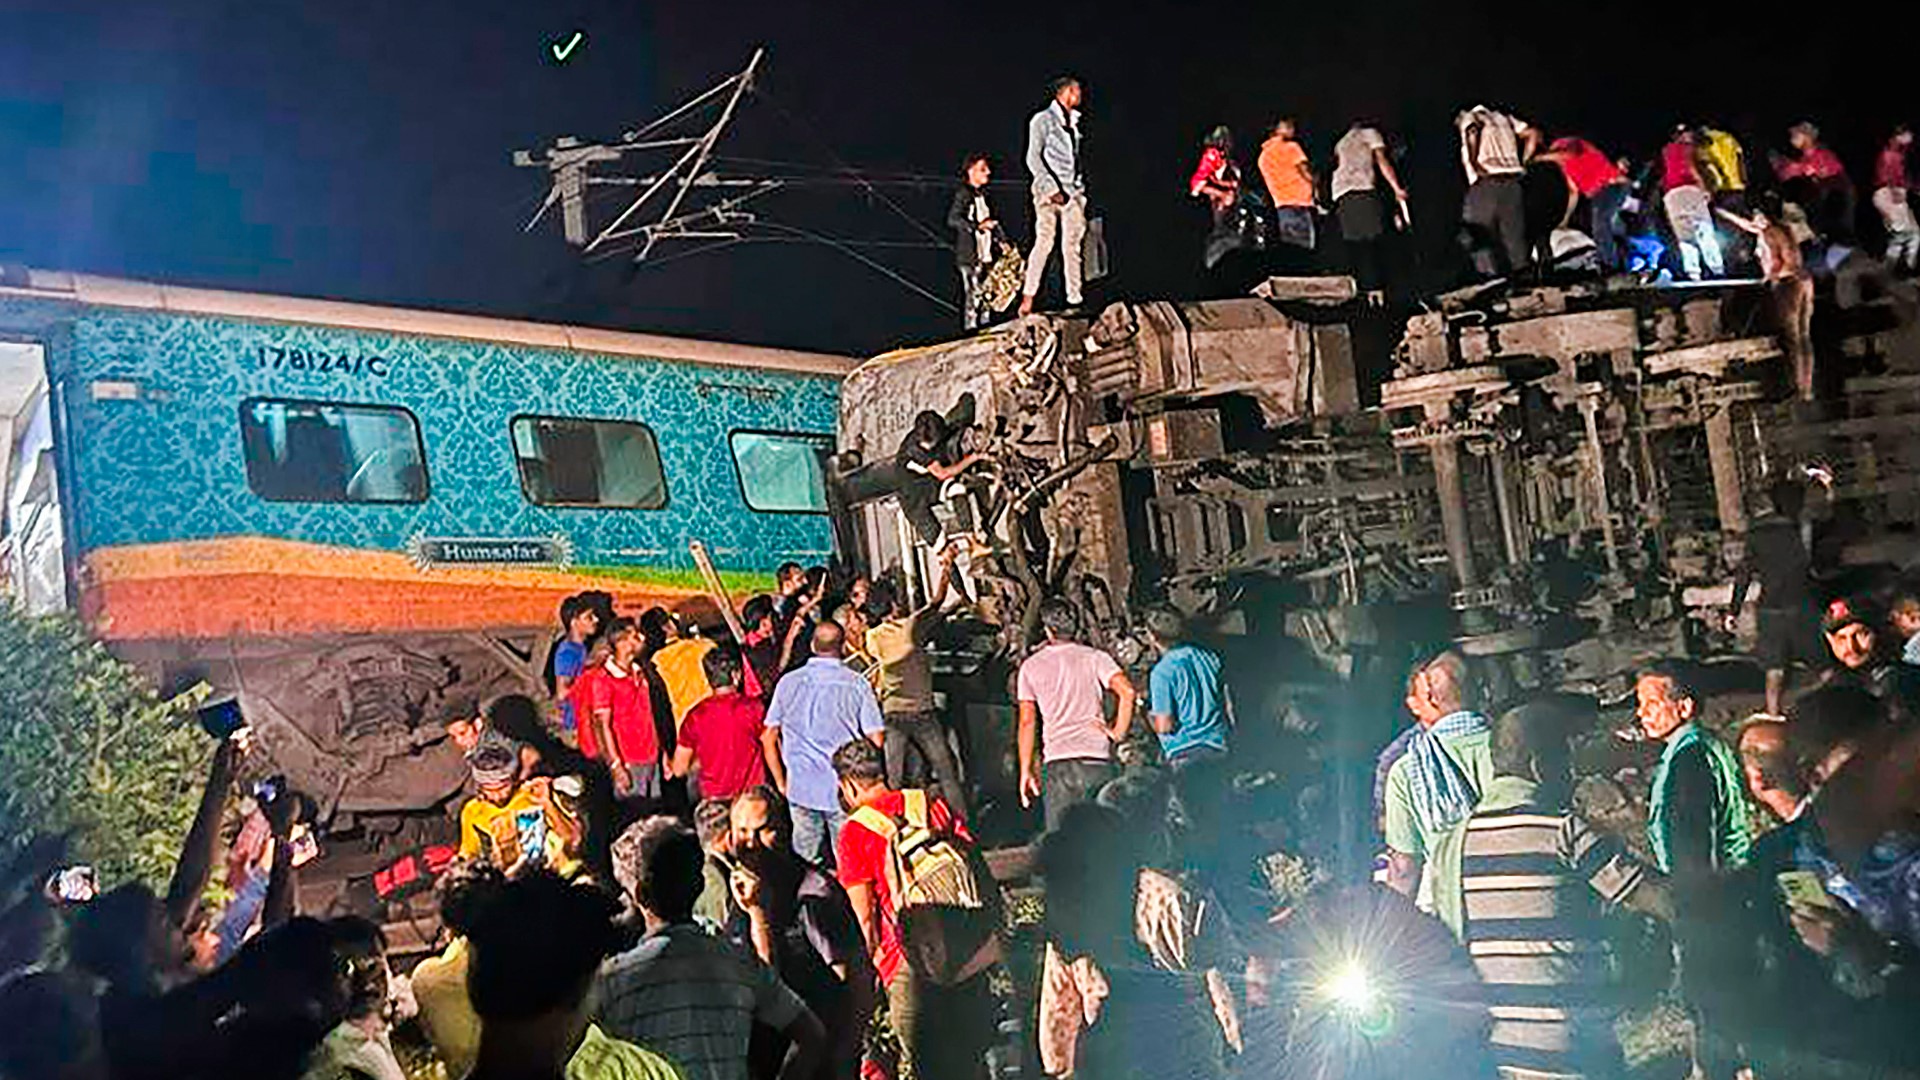 Two passenger trains derailed Friday night in India, killing more than 230 people and leaving hundreds of others trapped inside.